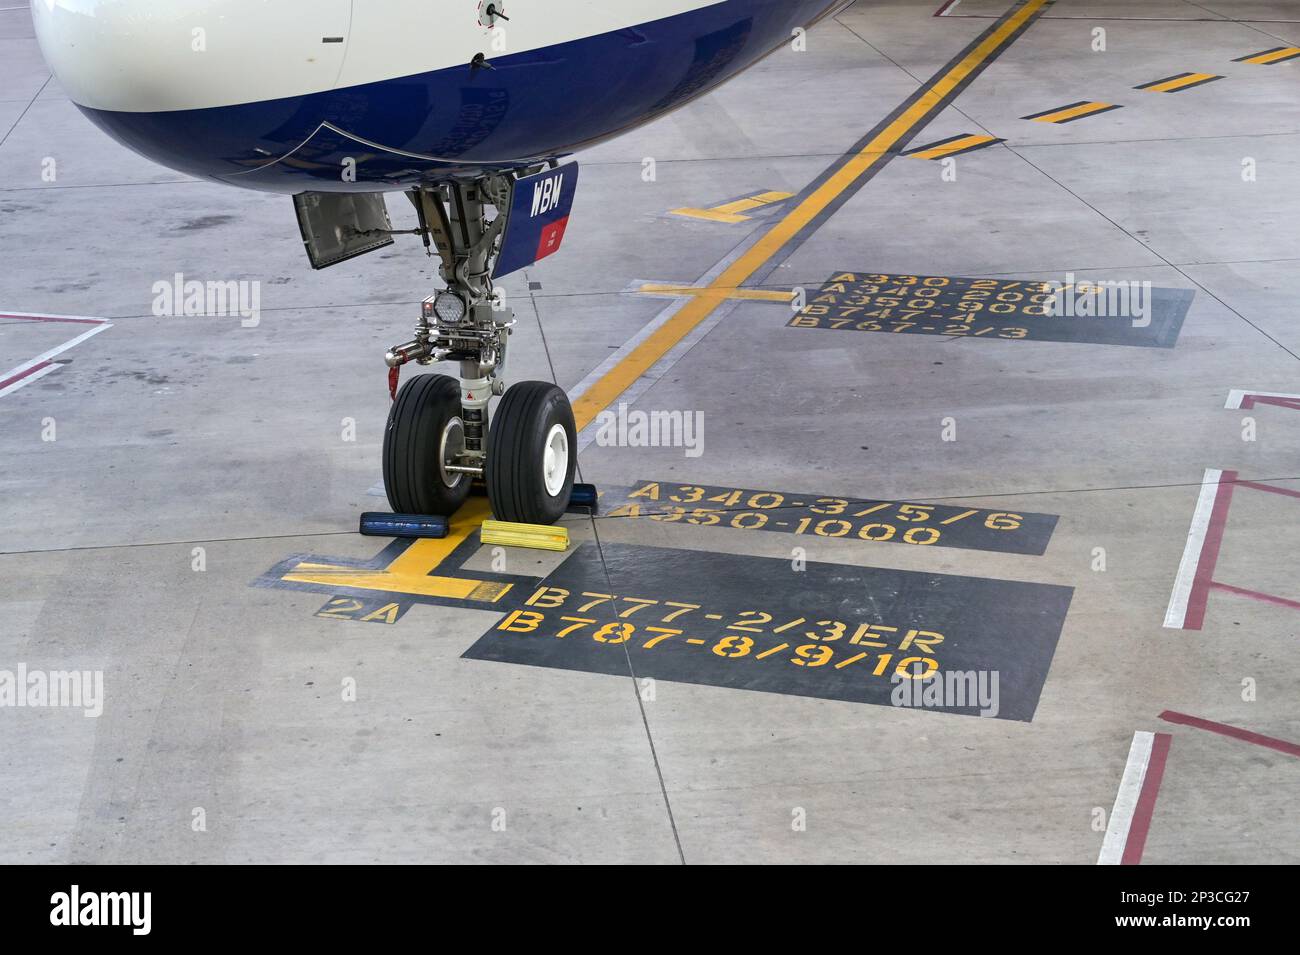 Austin, Texas - February 2023: Nose wheel of a British Airways Airbus A350 jet parked at the terminal on markings to show the stop point. Stock Photo